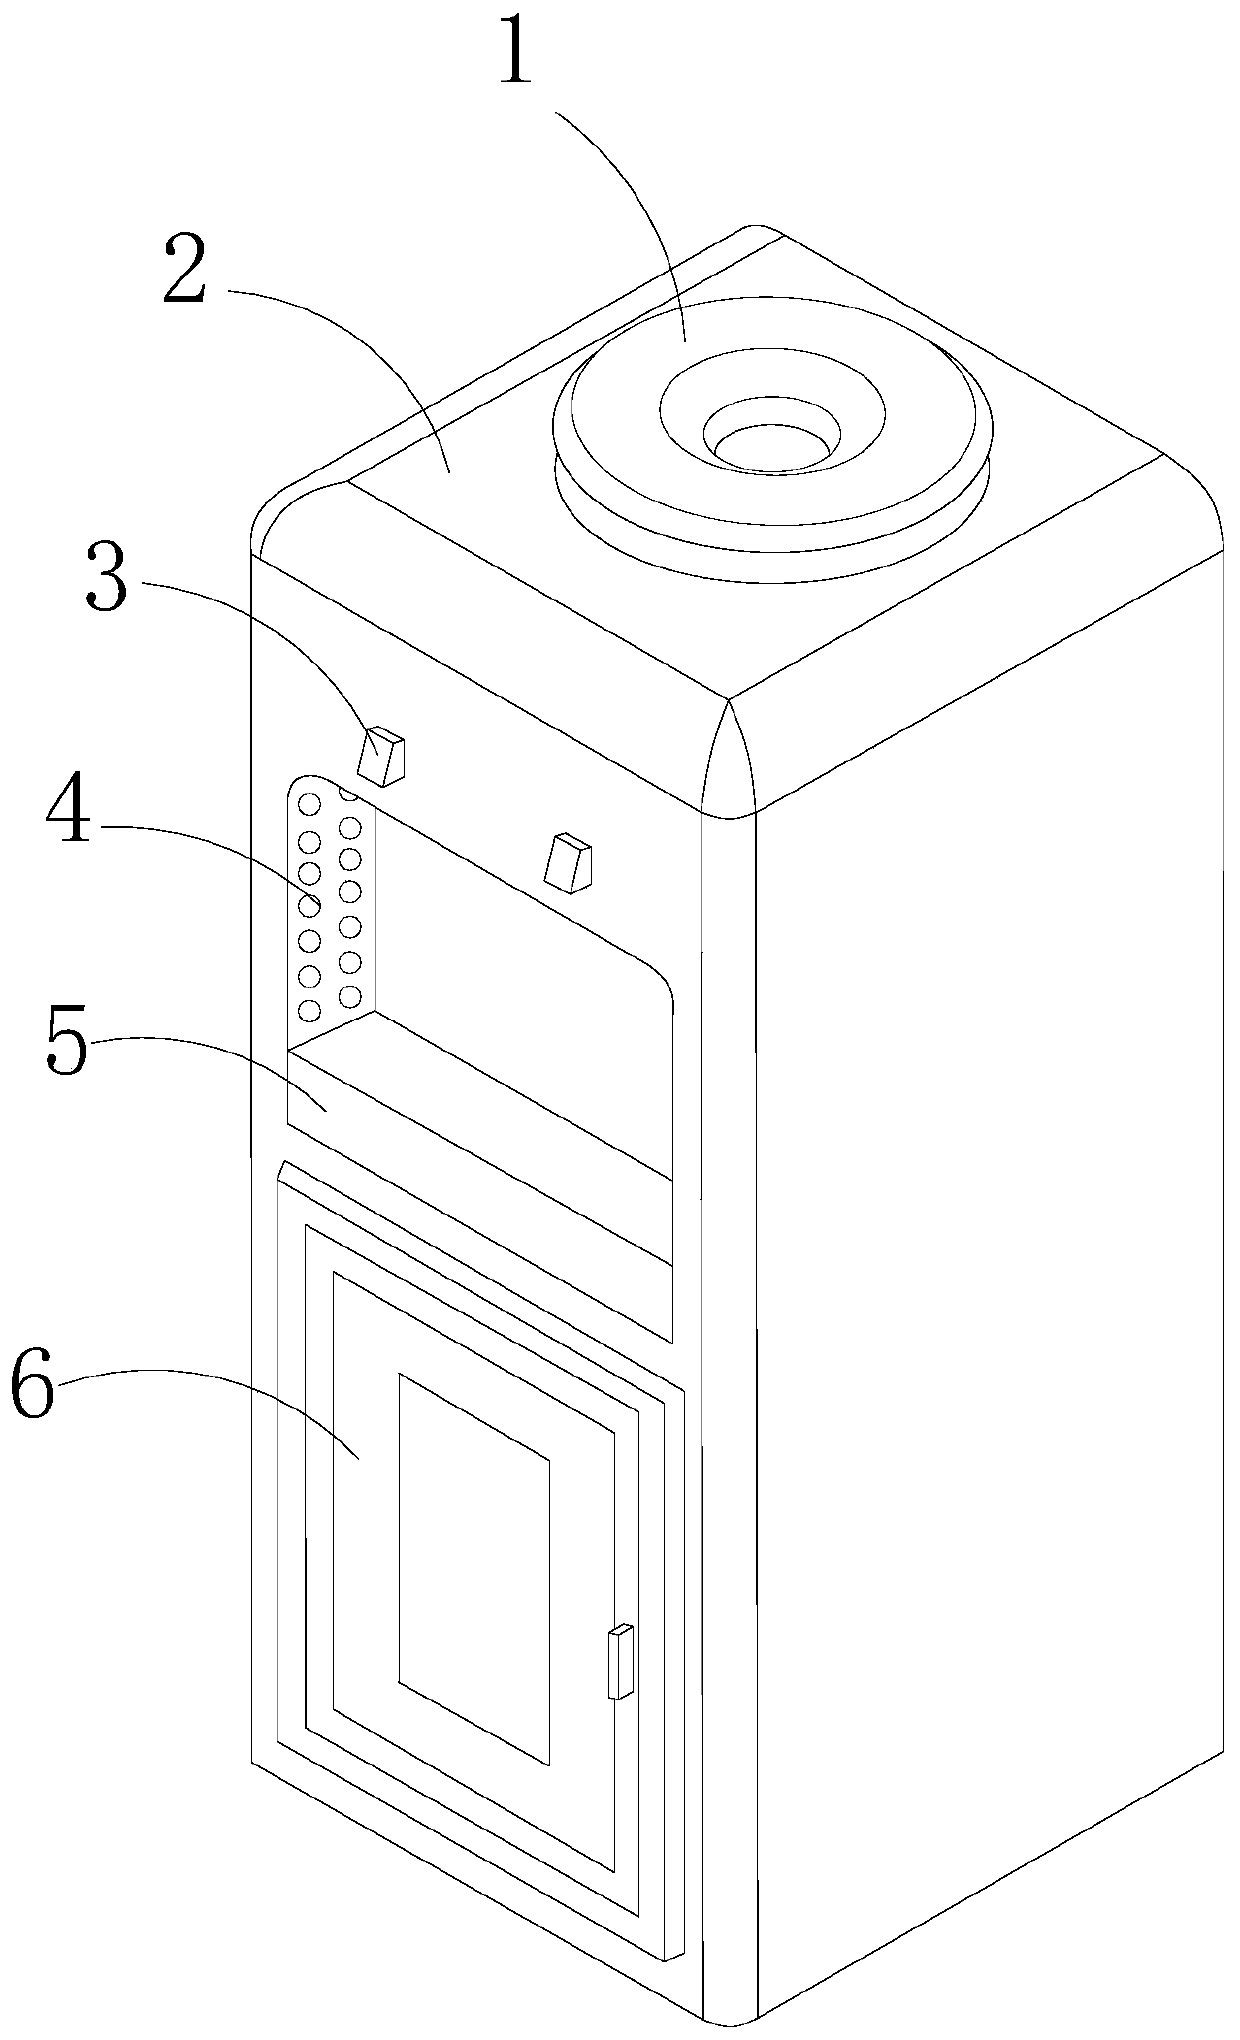 A water dispenser that triggers lighting devices based on changes in the volume of the water outlet